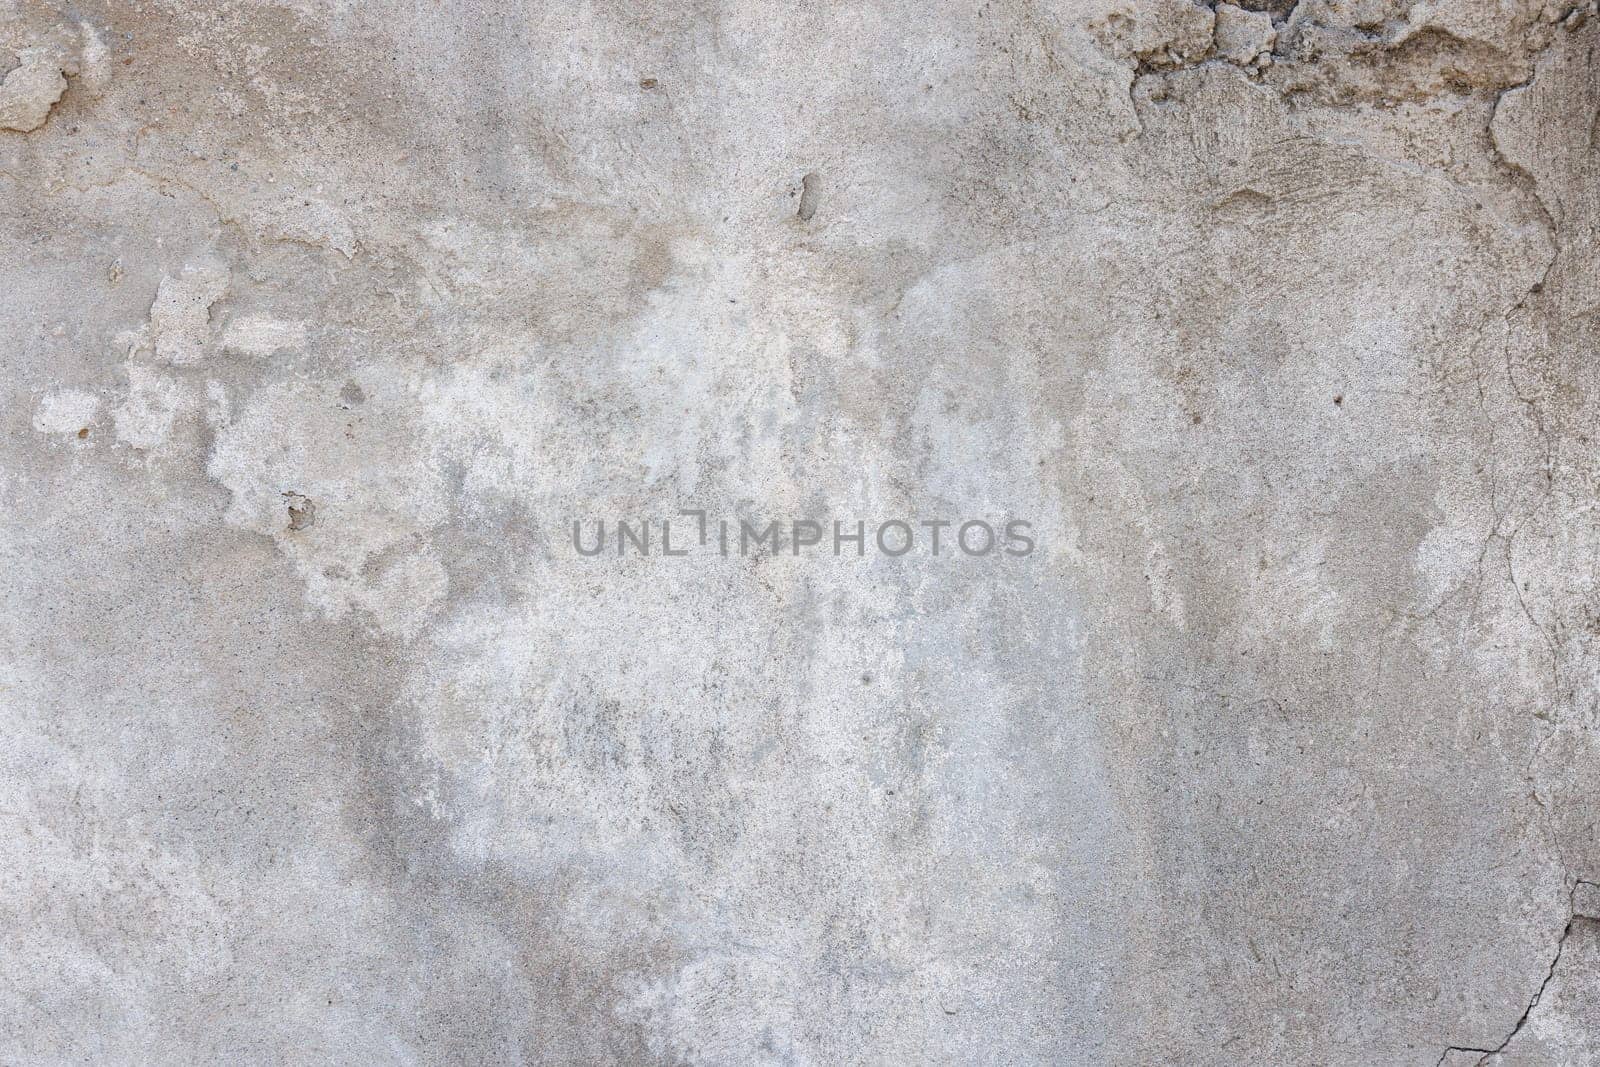 scratched shabby old whitewash on concrete wall texture and flat full-frame closeup background.